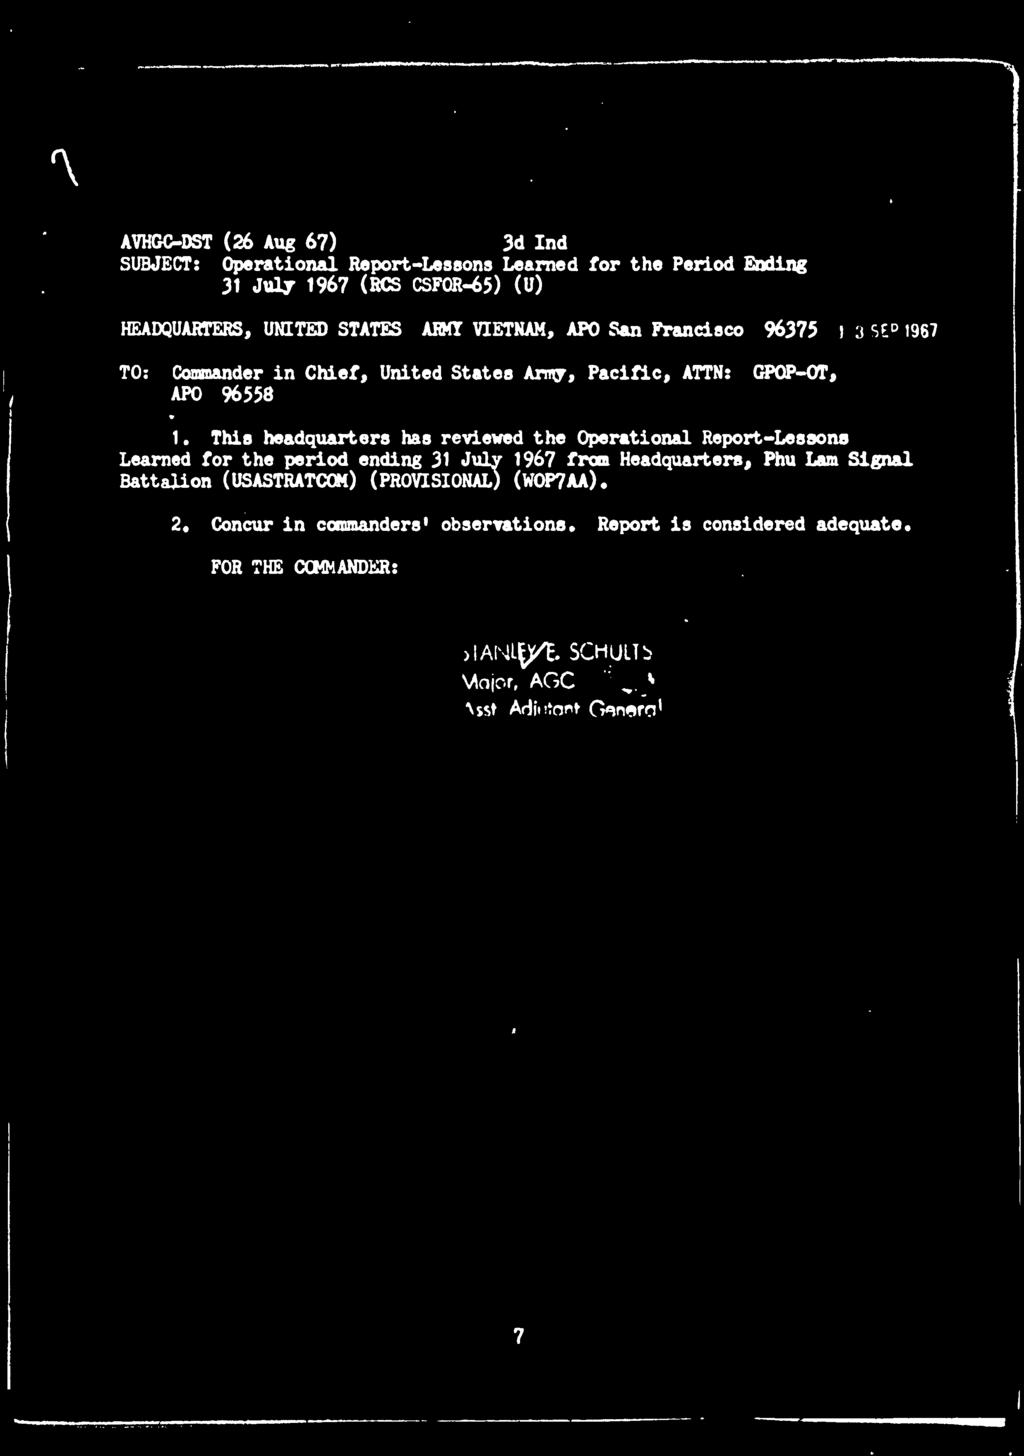 r \ AVHGC-DST (26 Aug 67) 3d Ind SUBJECT: Operational Report-Lessons Learned for the Period Ending 31 July 1967 (BCS CSFOR-^5) (U) HEADQUARTERS, UNITED STATES AHMT VIETNAM, AFO San Francisco 96375 I